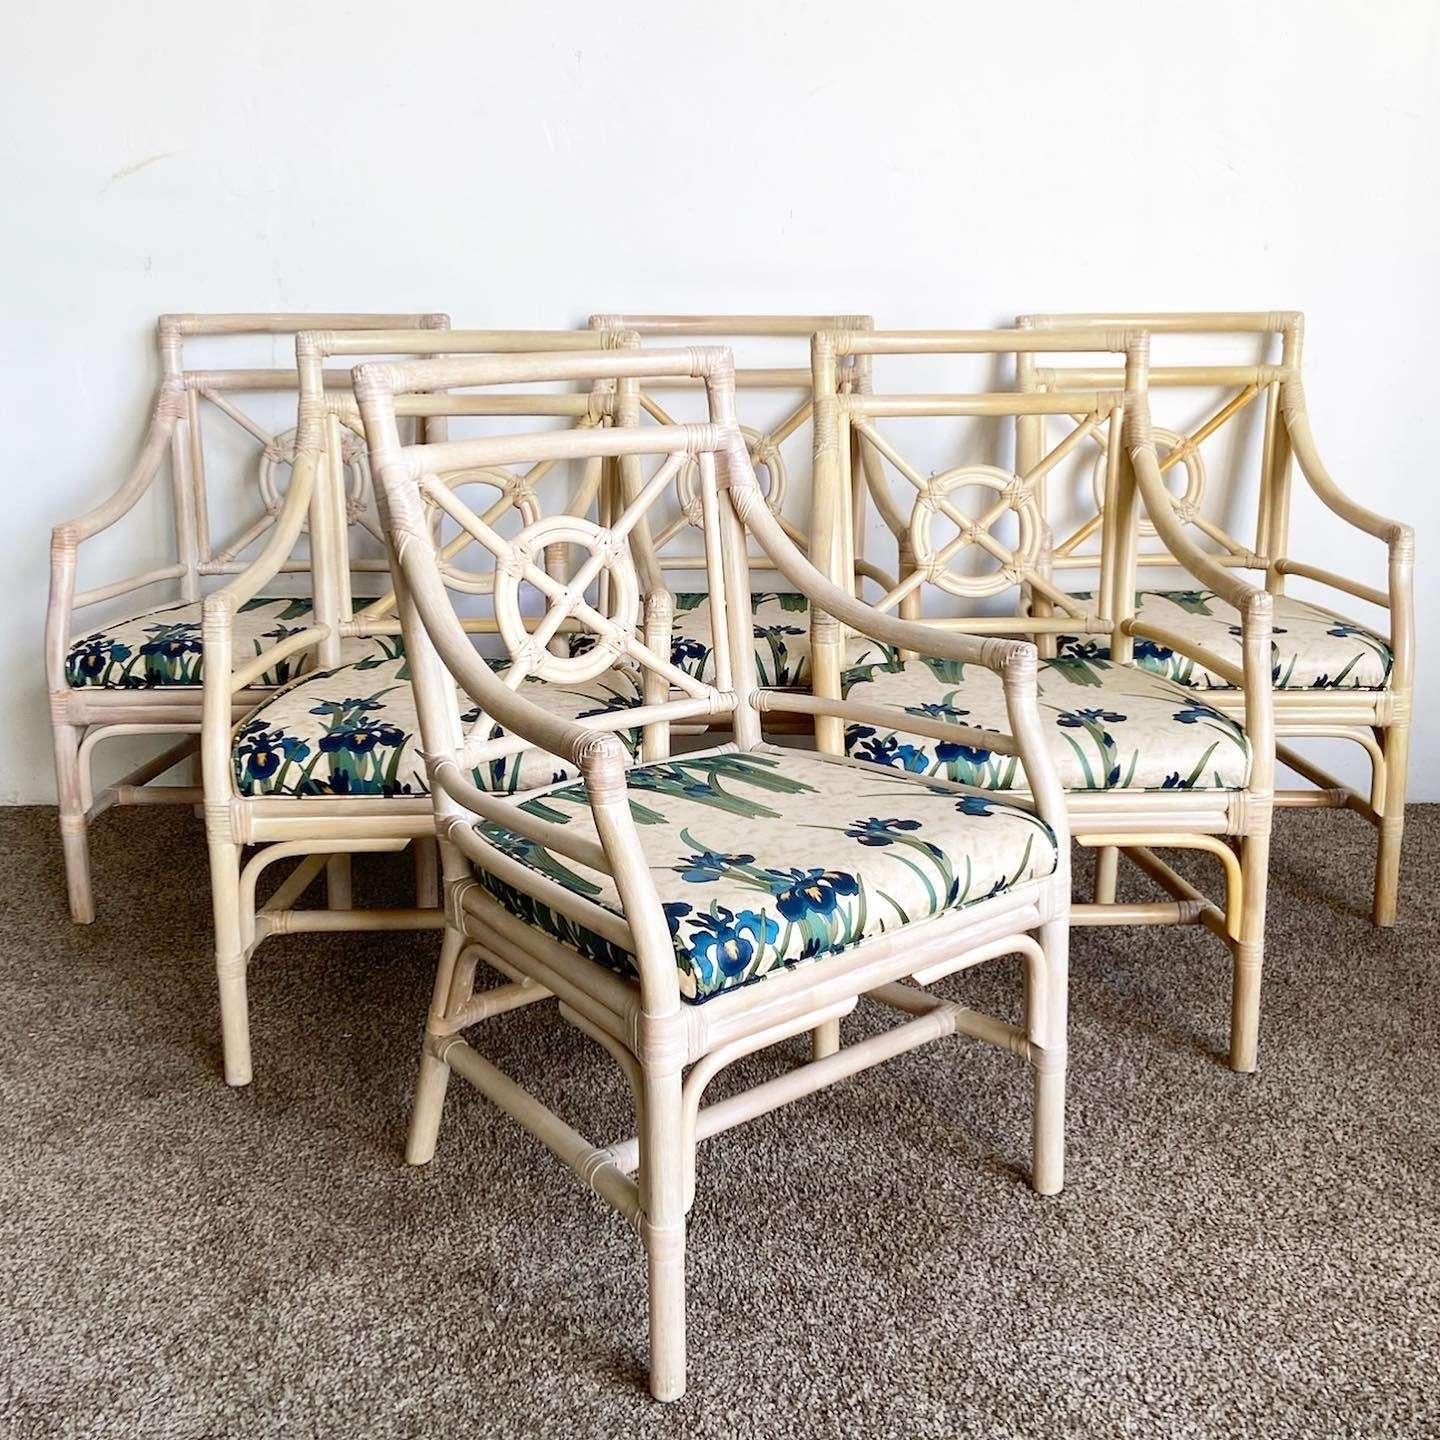 Exquisite set of 6 rattan dining armchairs crafted in the manner and style of McGuire by Shelby Williams. They feature a bullseye target design on the square back splat. Graceful arms conjoin to a generous seat with green and blue organic